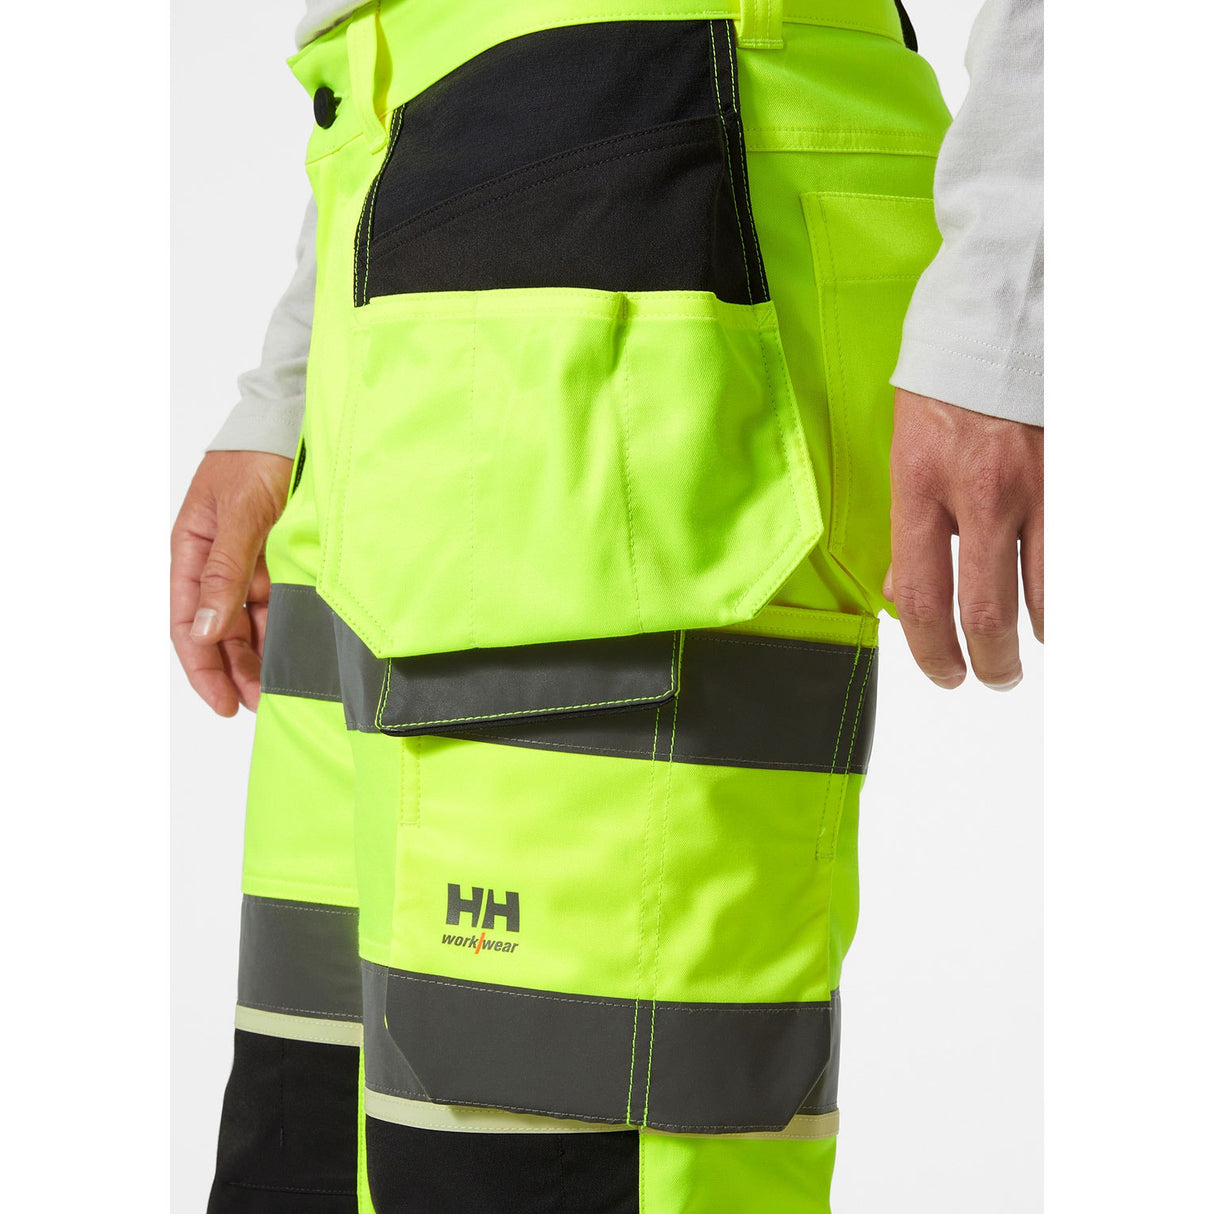 Helly Hansen Workwear Uc-Me Construction Pirate Pant